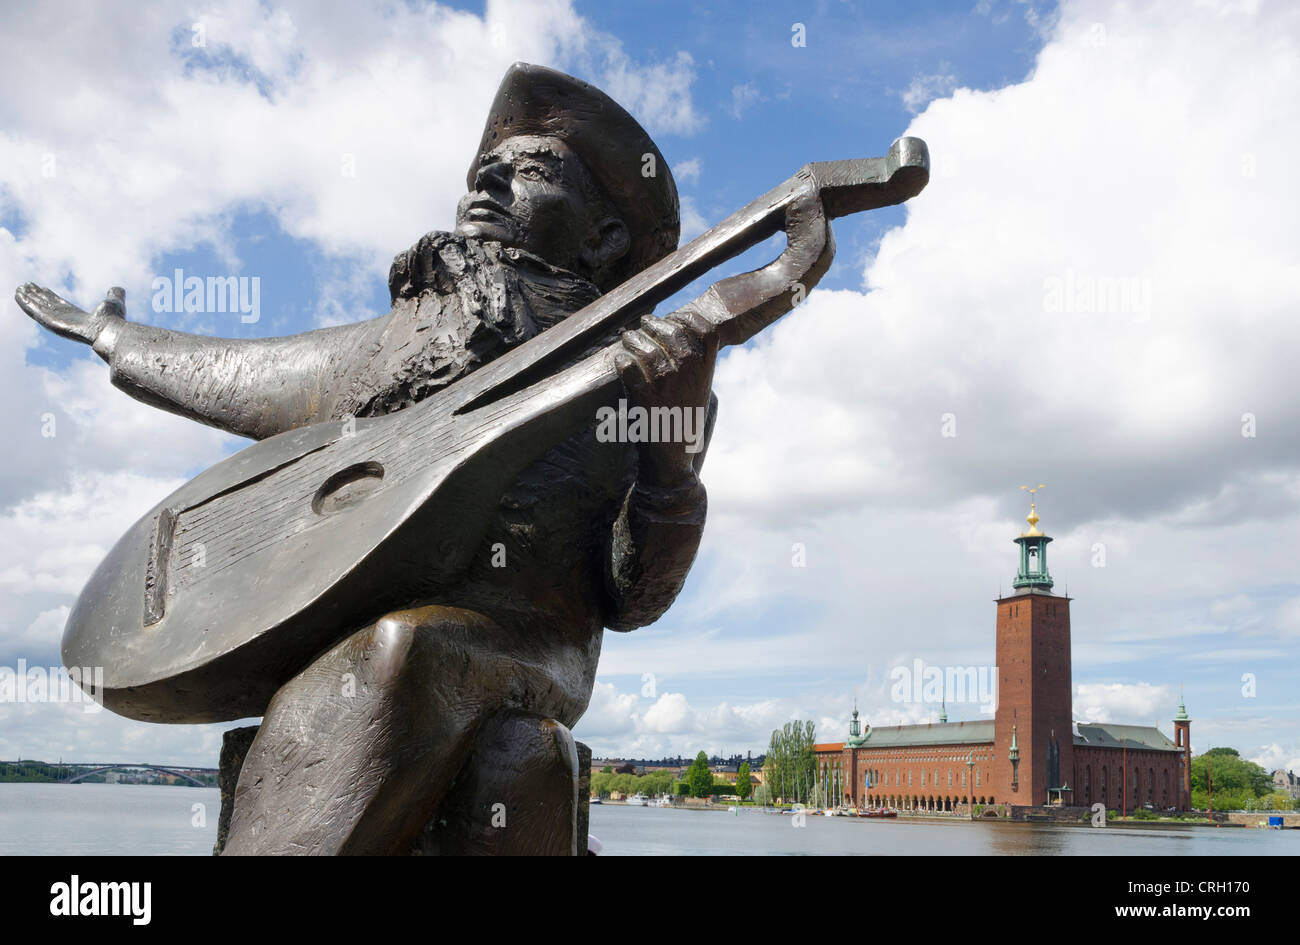 Riddarholmen High Resolution Stock Photography and Images - Alamy